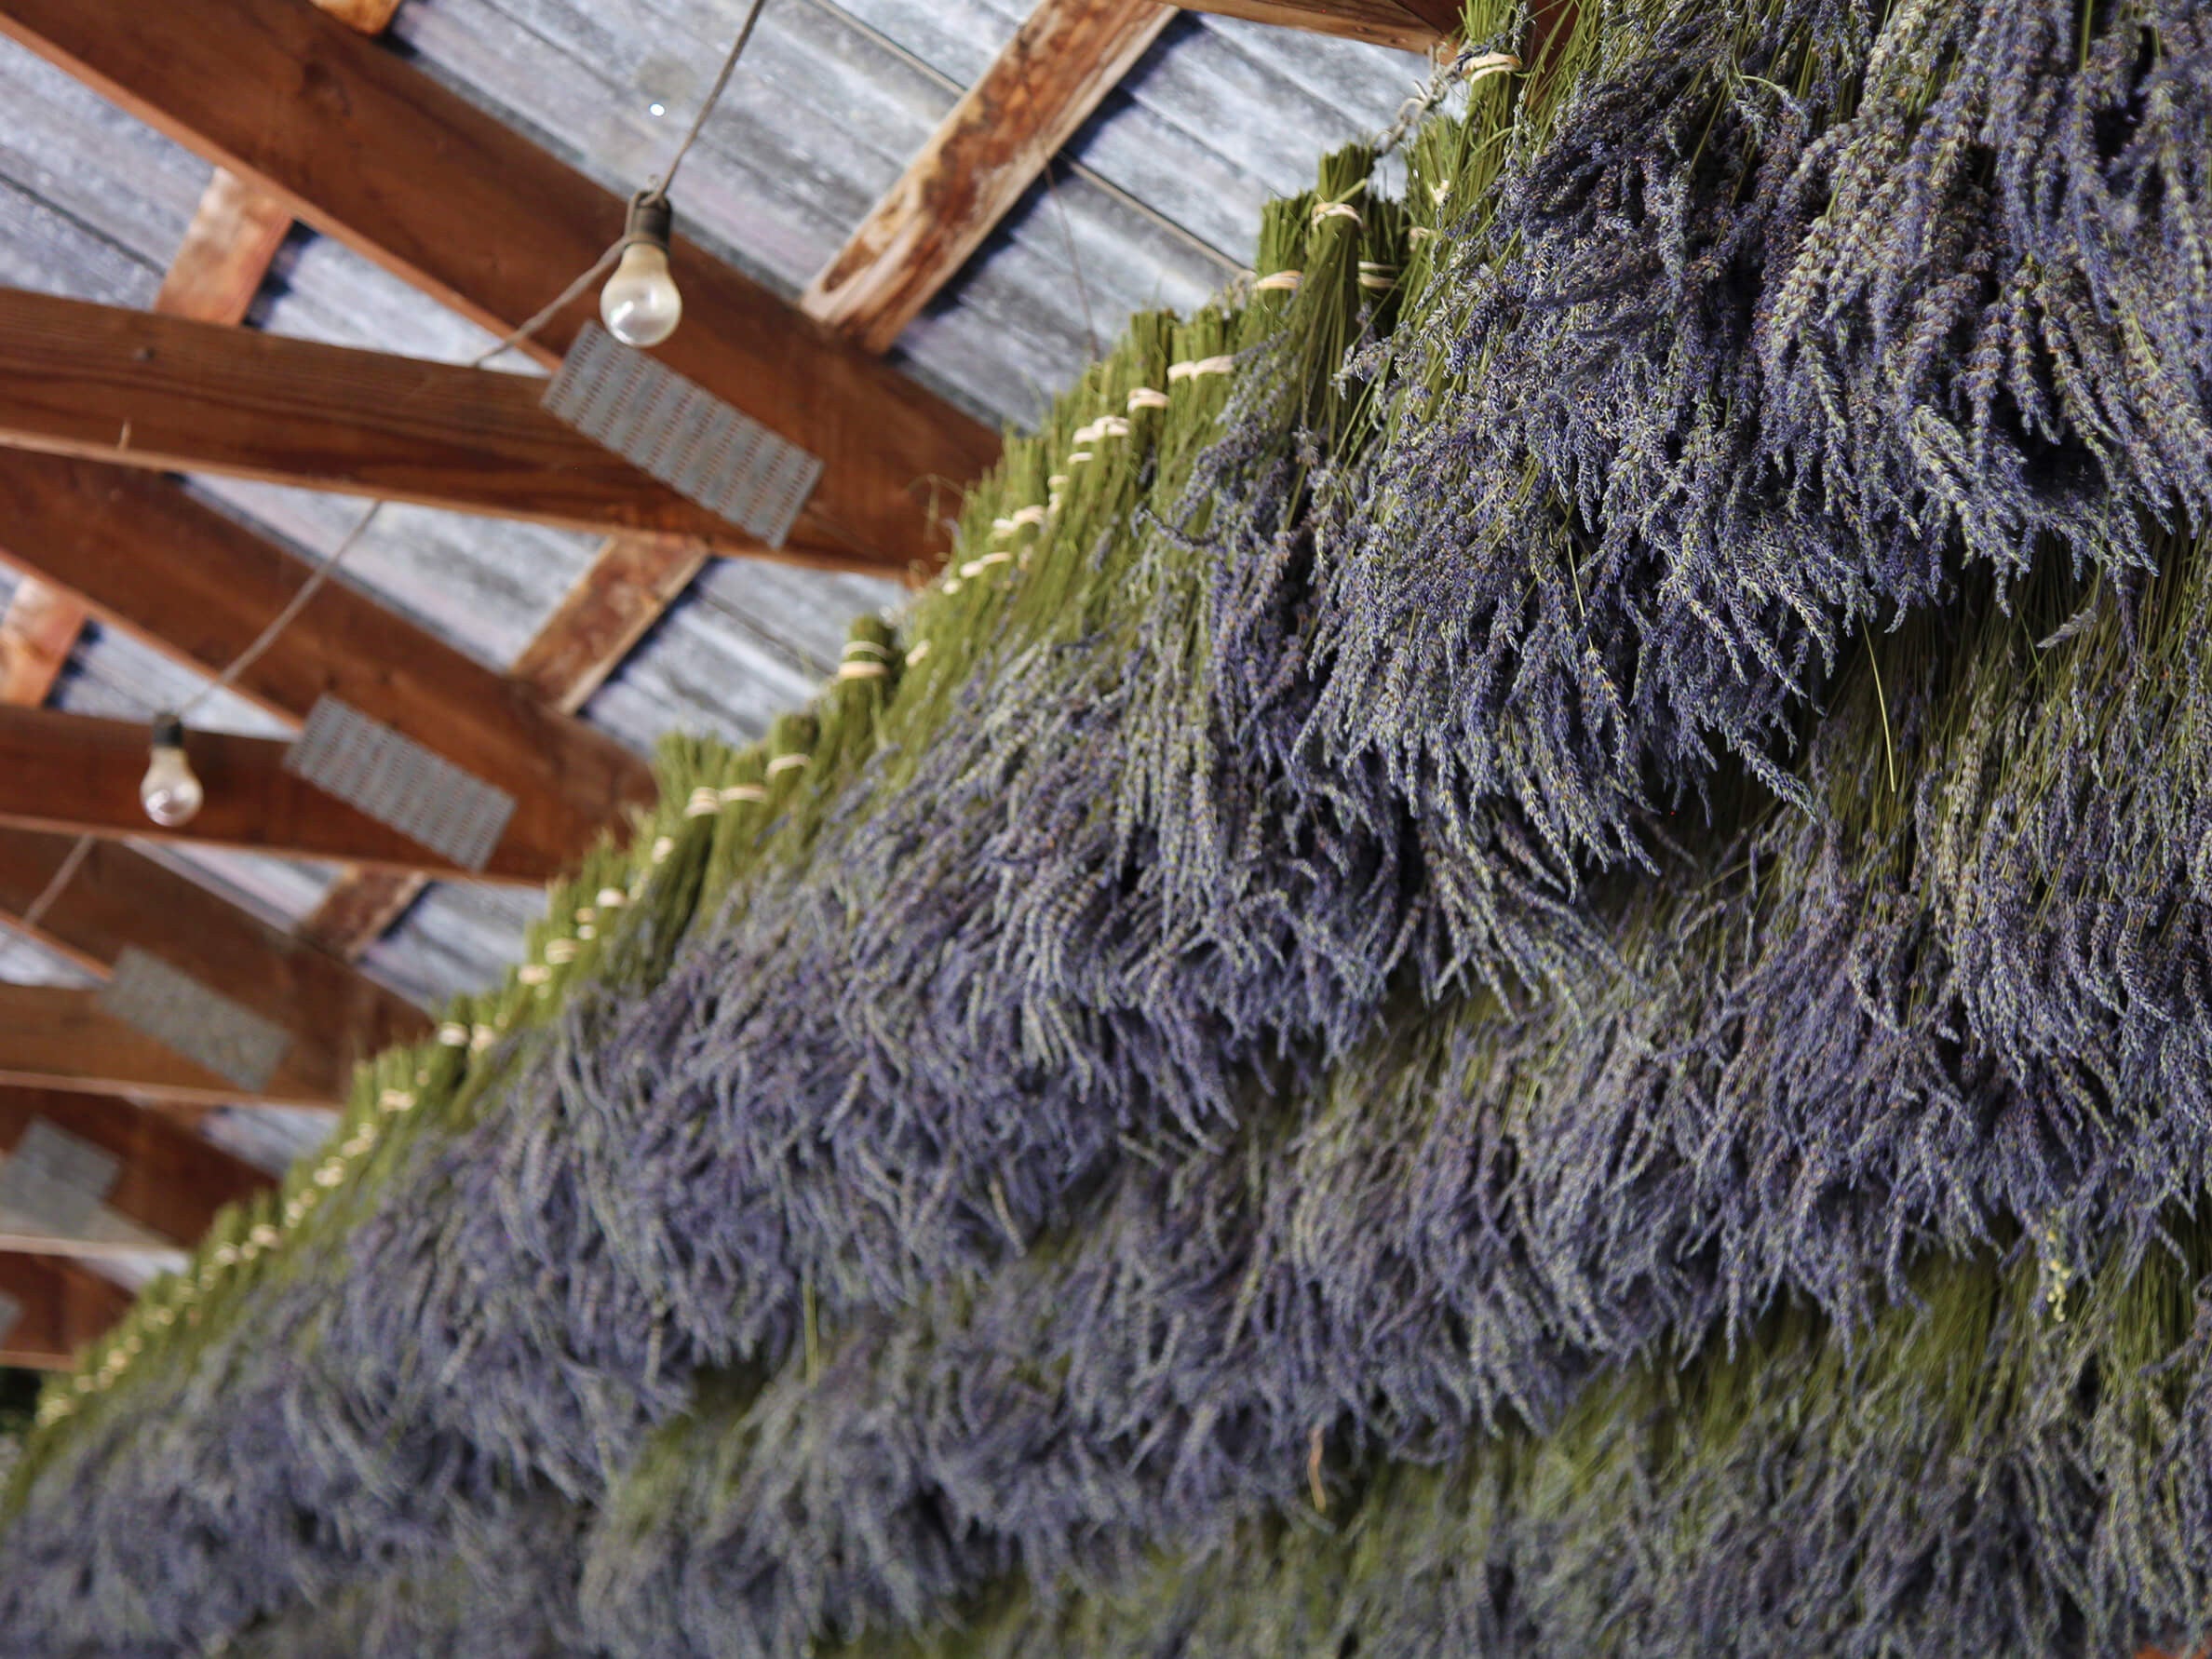 lavender buds drying